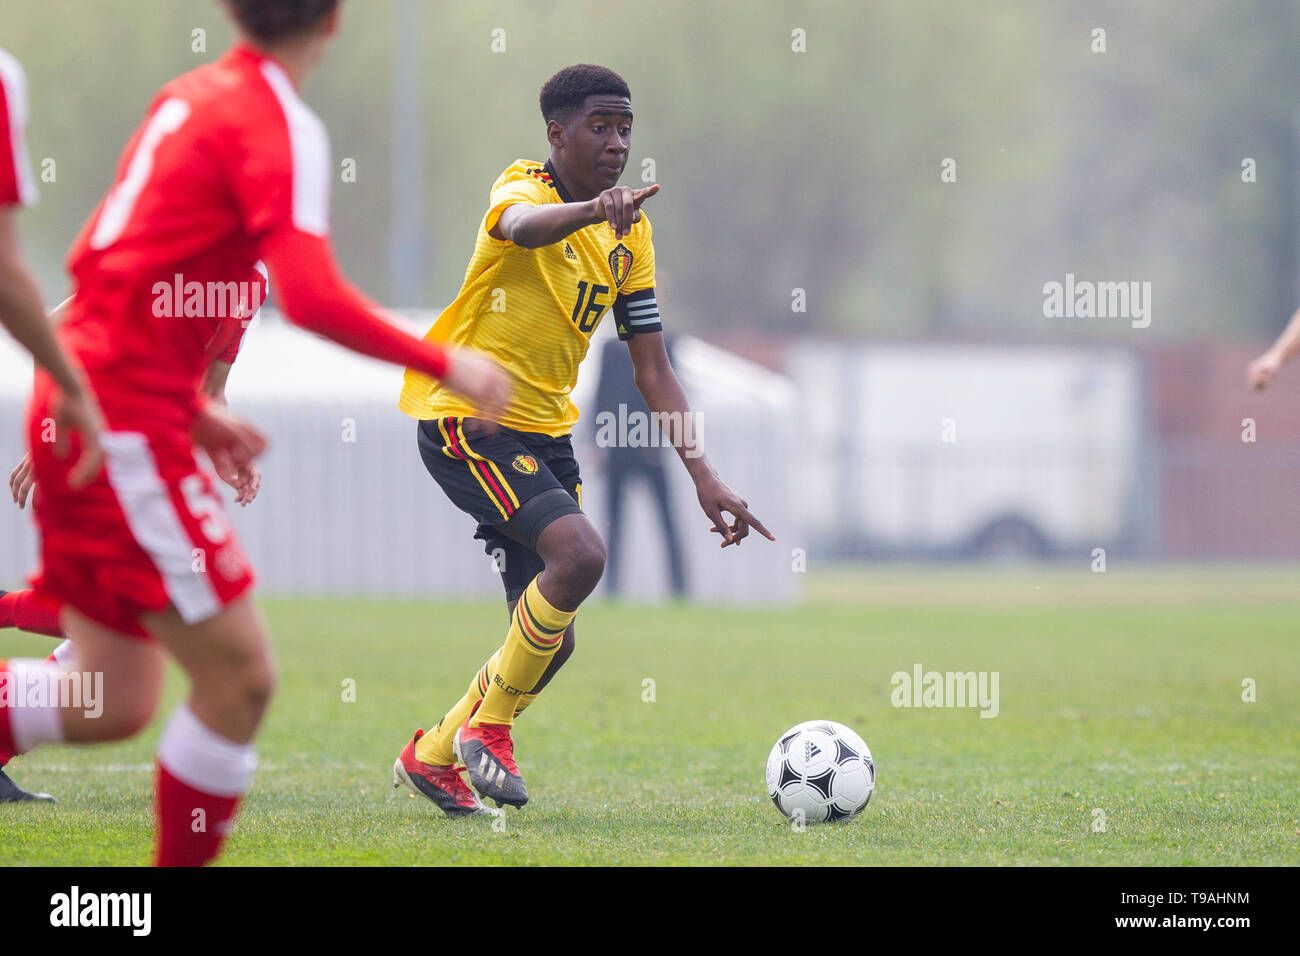 Newport, Wales, UK, April 17th 2019. Lucas Mondele of Belgium during the Tri-Nations Under 15 International Friendly match between Belgium and Switzer Stock Photo